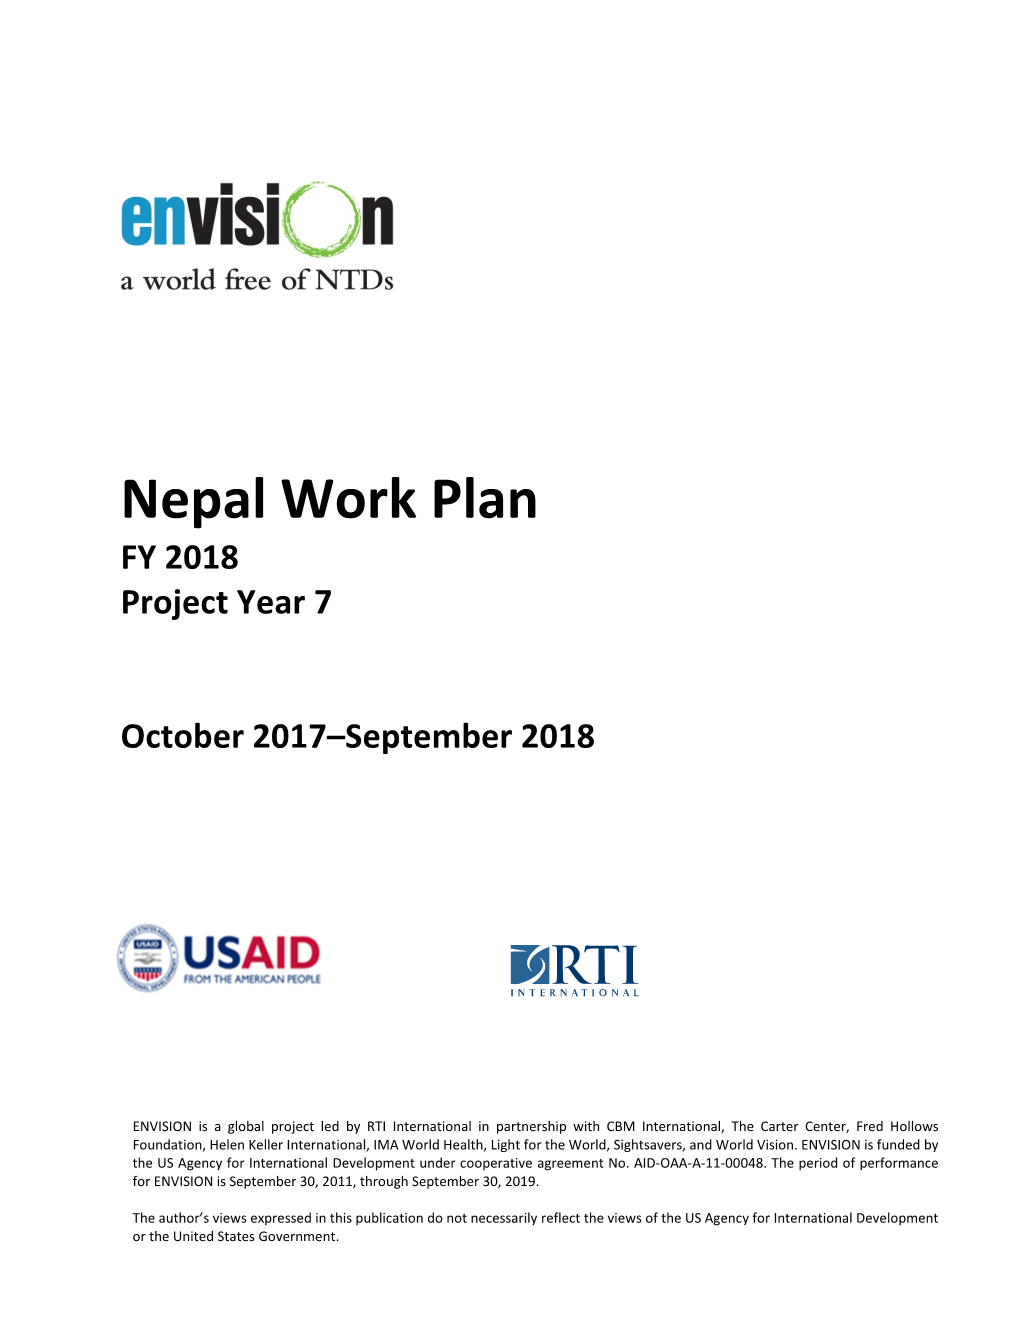 Nepal Work Plan FY 2018 Project Year 7